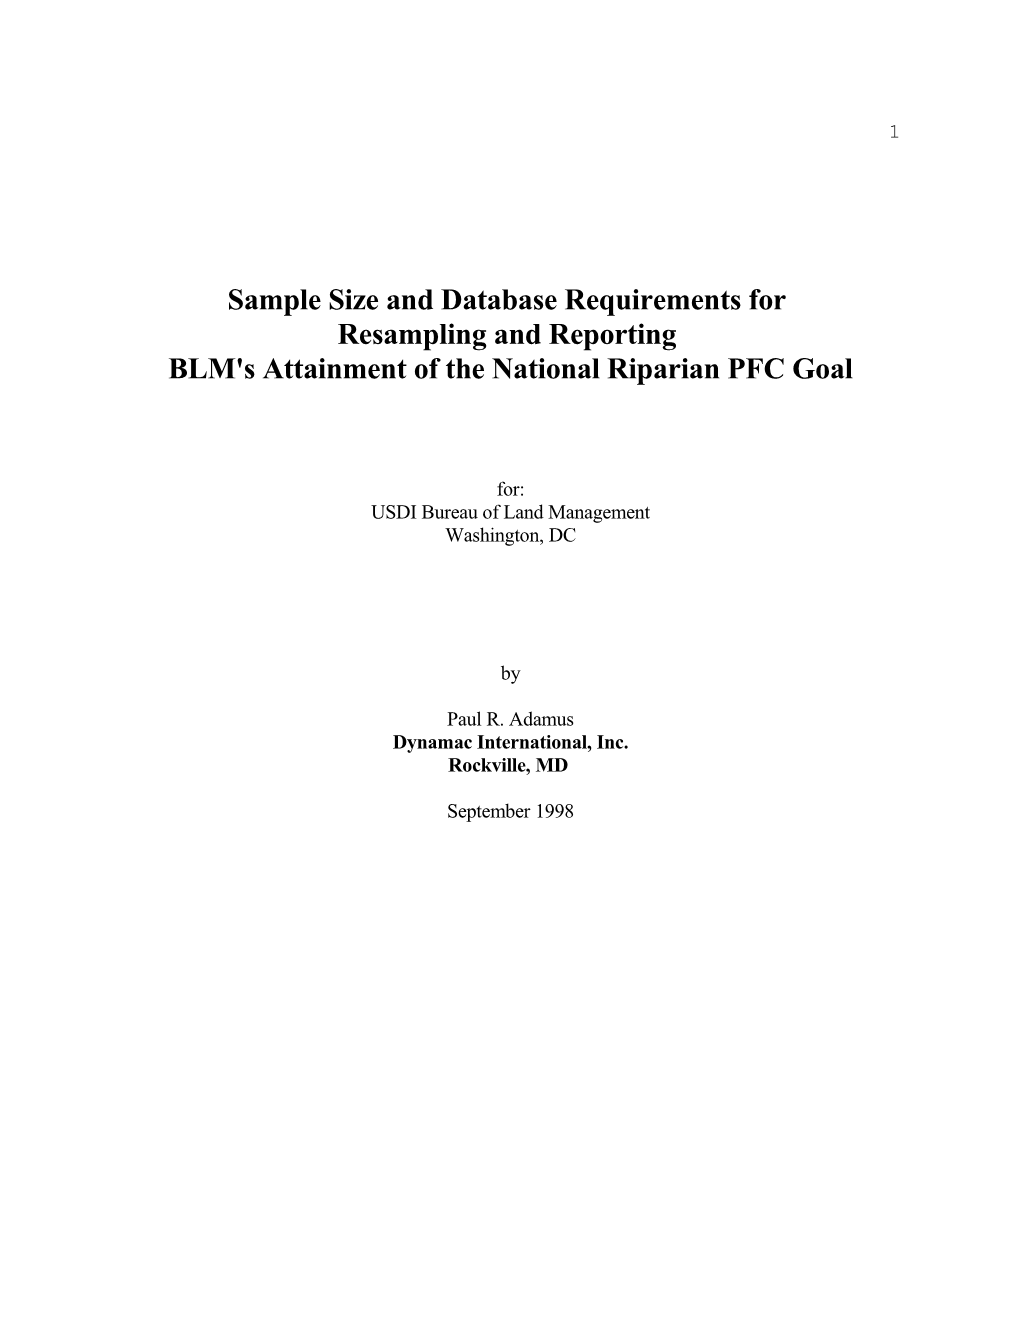 Sample Size and Database Requirements for Resampling And